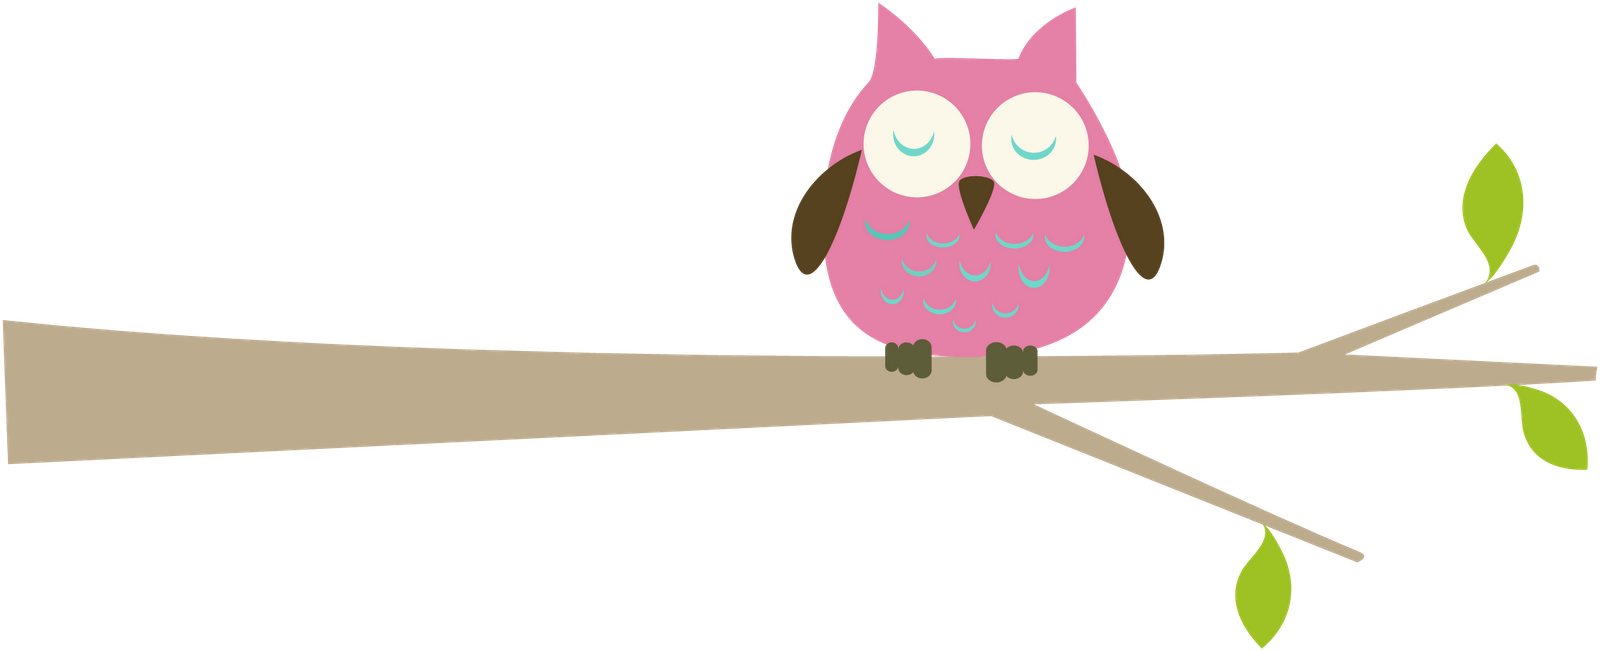 Images For > Pink And Blue Owl Clip Art